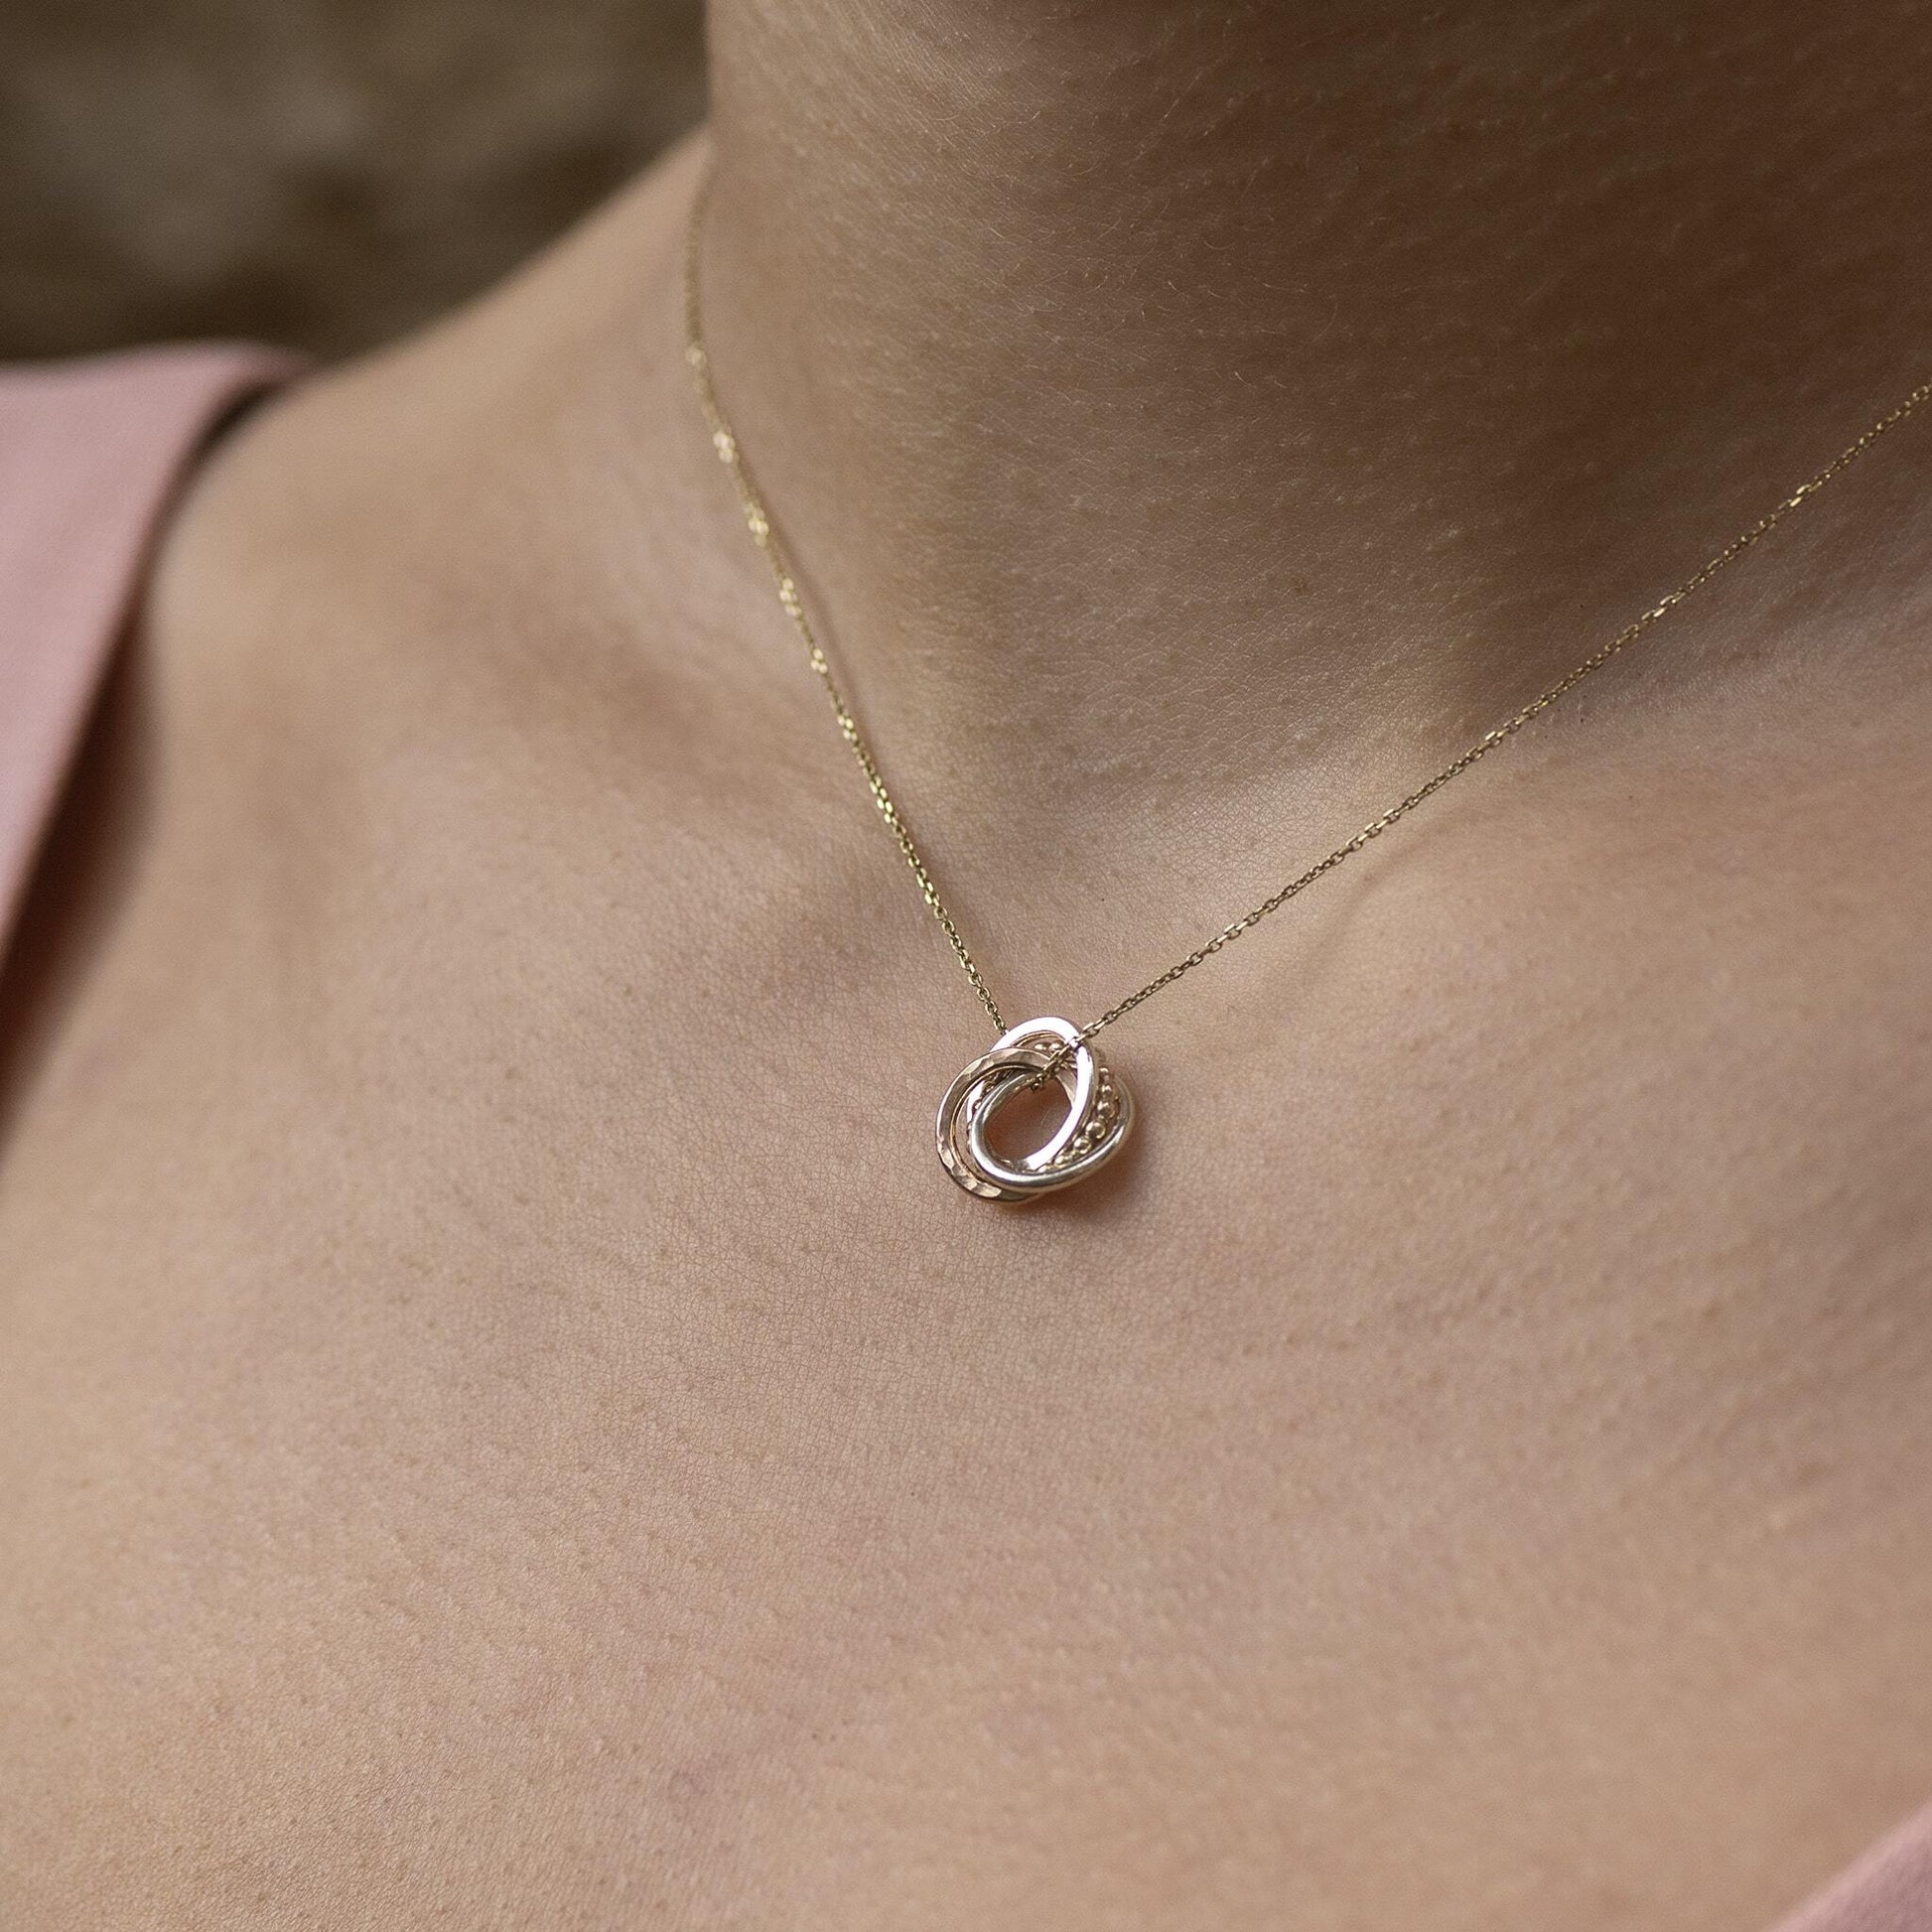 Tiny 9kt Gold 40th Birthday Love Knot Necklace - The Original 4 Links for 4 Decades Necklace - Recycled Gold, Rose Gold & White Gold